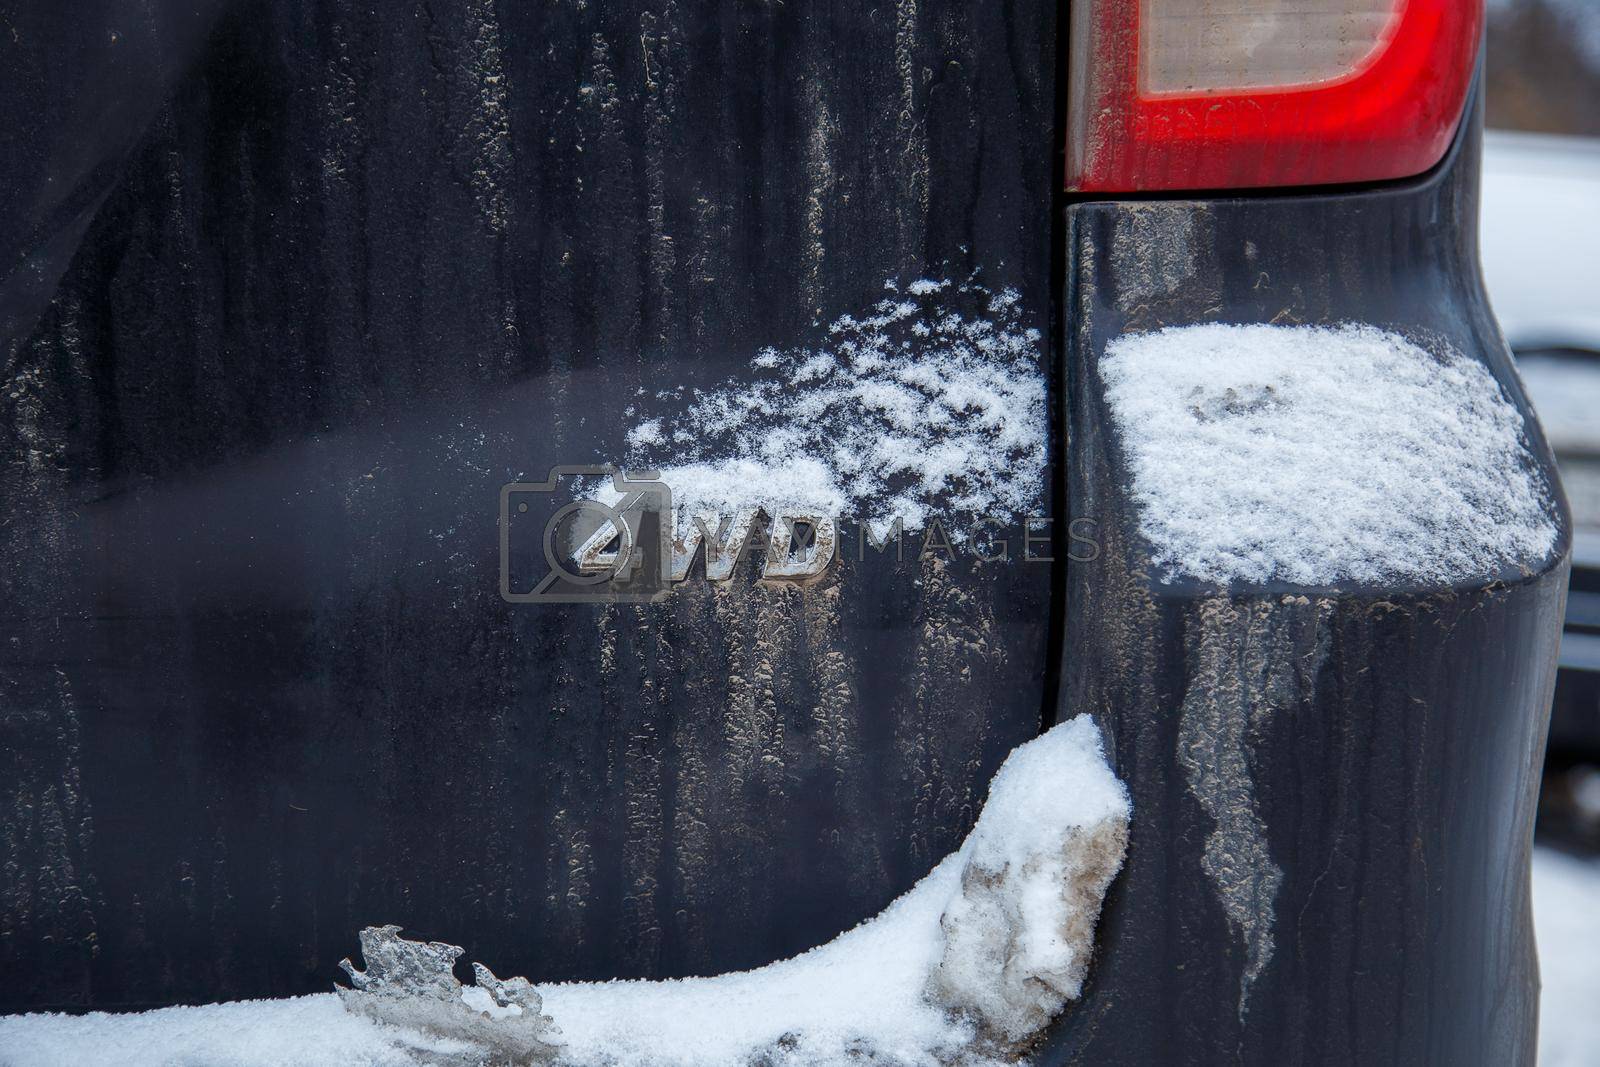 Royalty free image of an abbreviation 4wd - Four-wheel drive - on dirty black car back by z1b